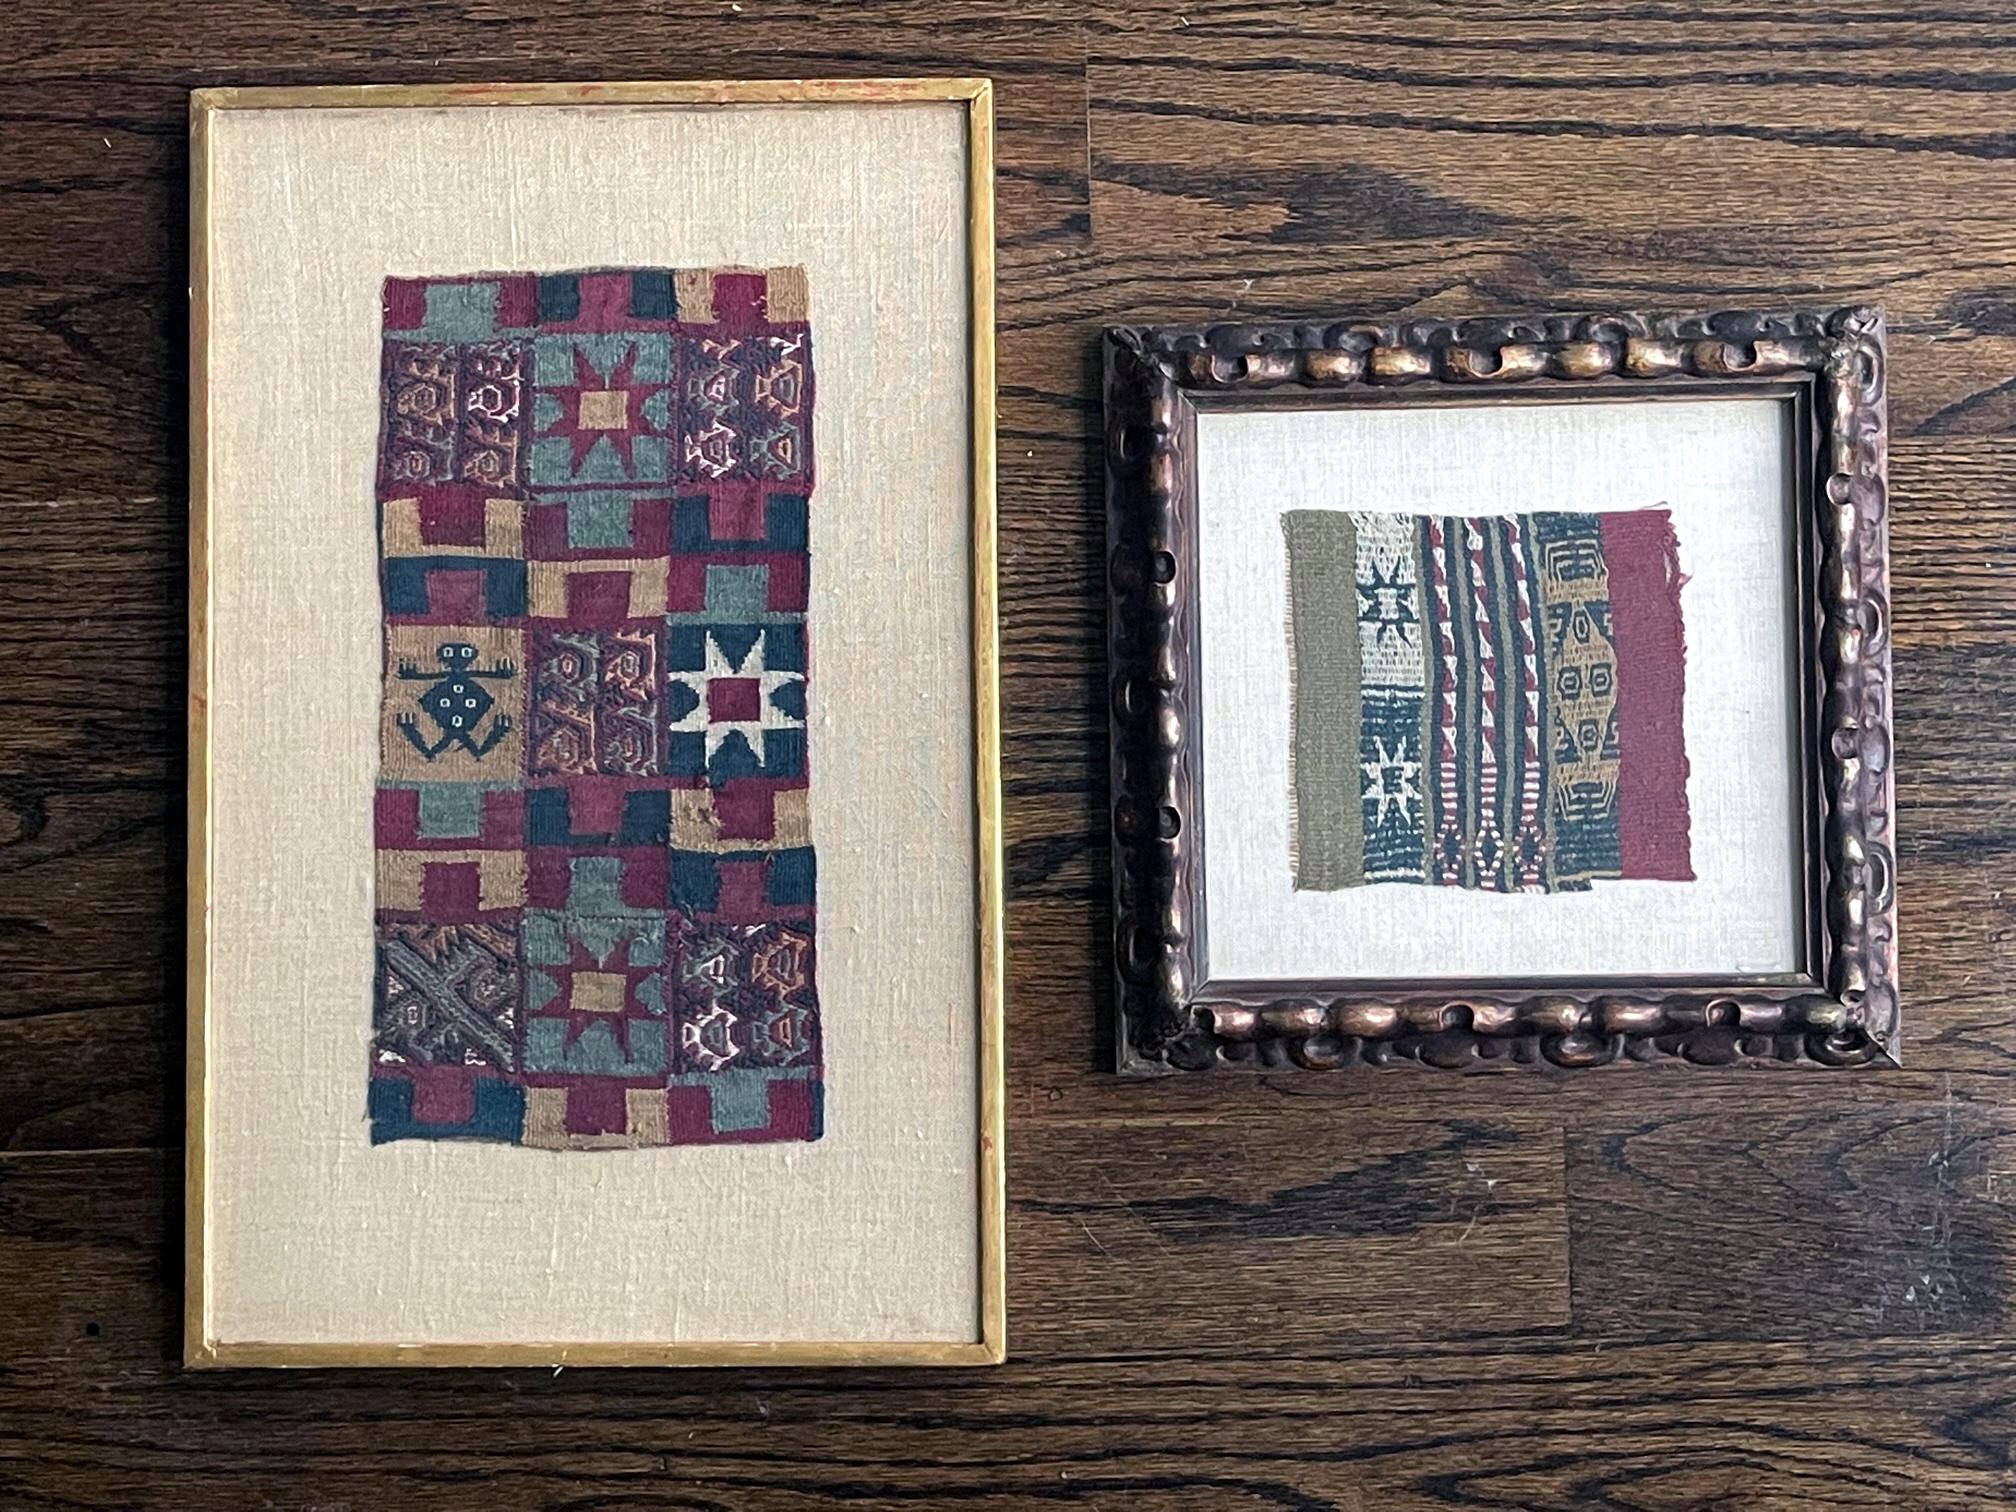 Two pre-Columbian textile fragments presented in wood frames. Handwoven in colored yarn, possibly camelid fibers, these pieces were from Inca period circa 15-16th century. One panel is a classic Inca weave that was likely part of a mantle or cape.